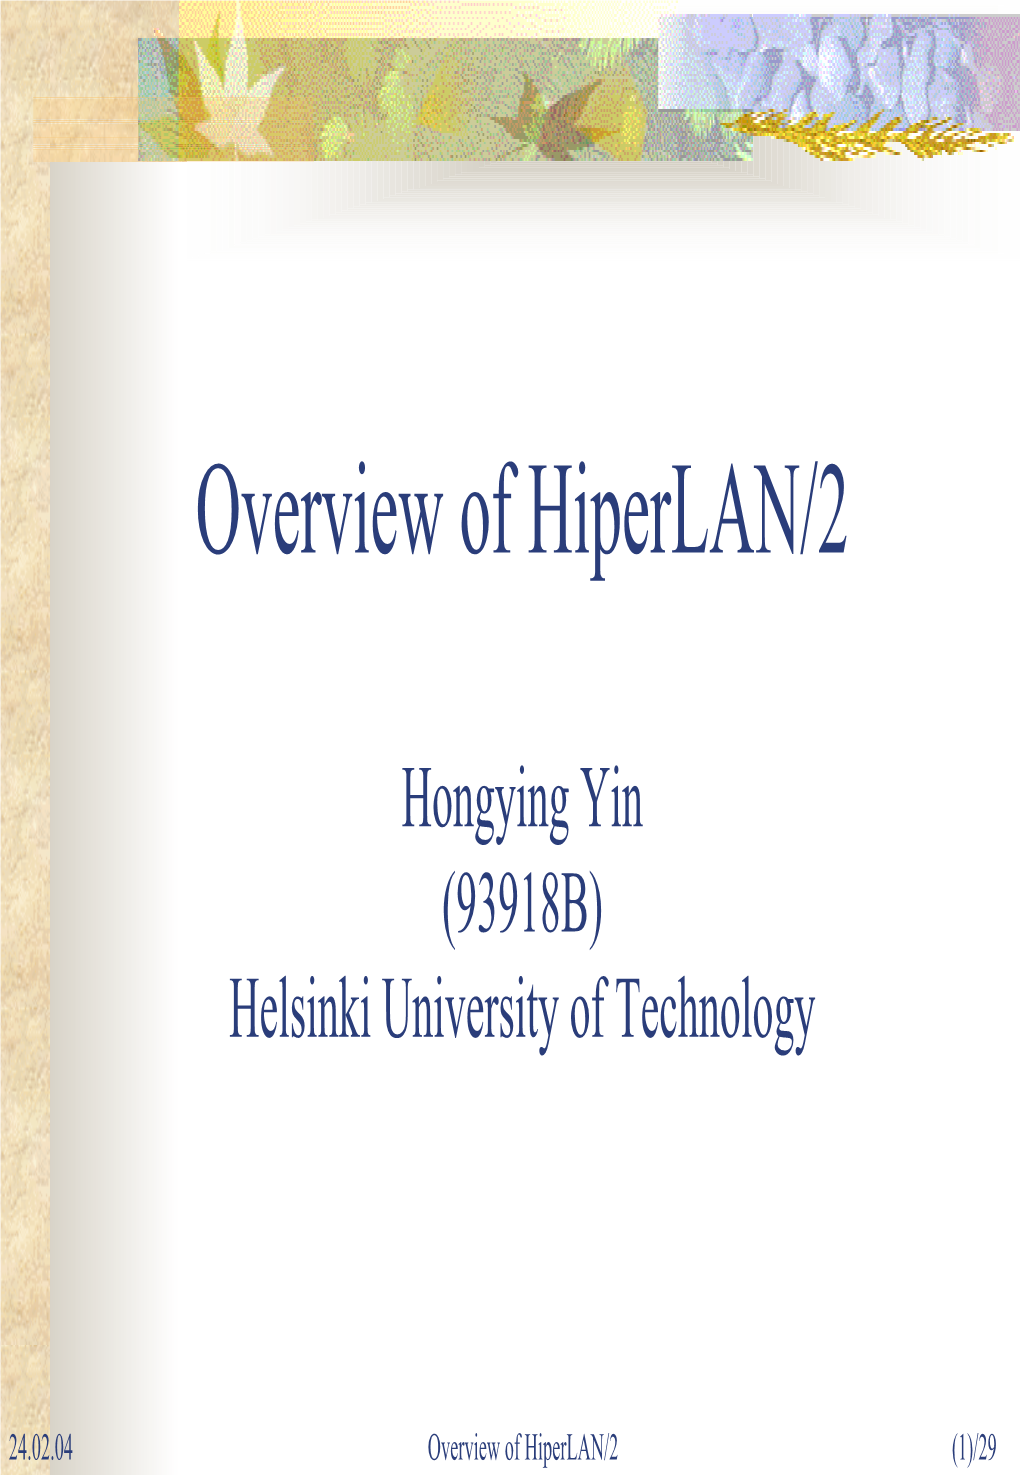 Overview of Hiperlan/2